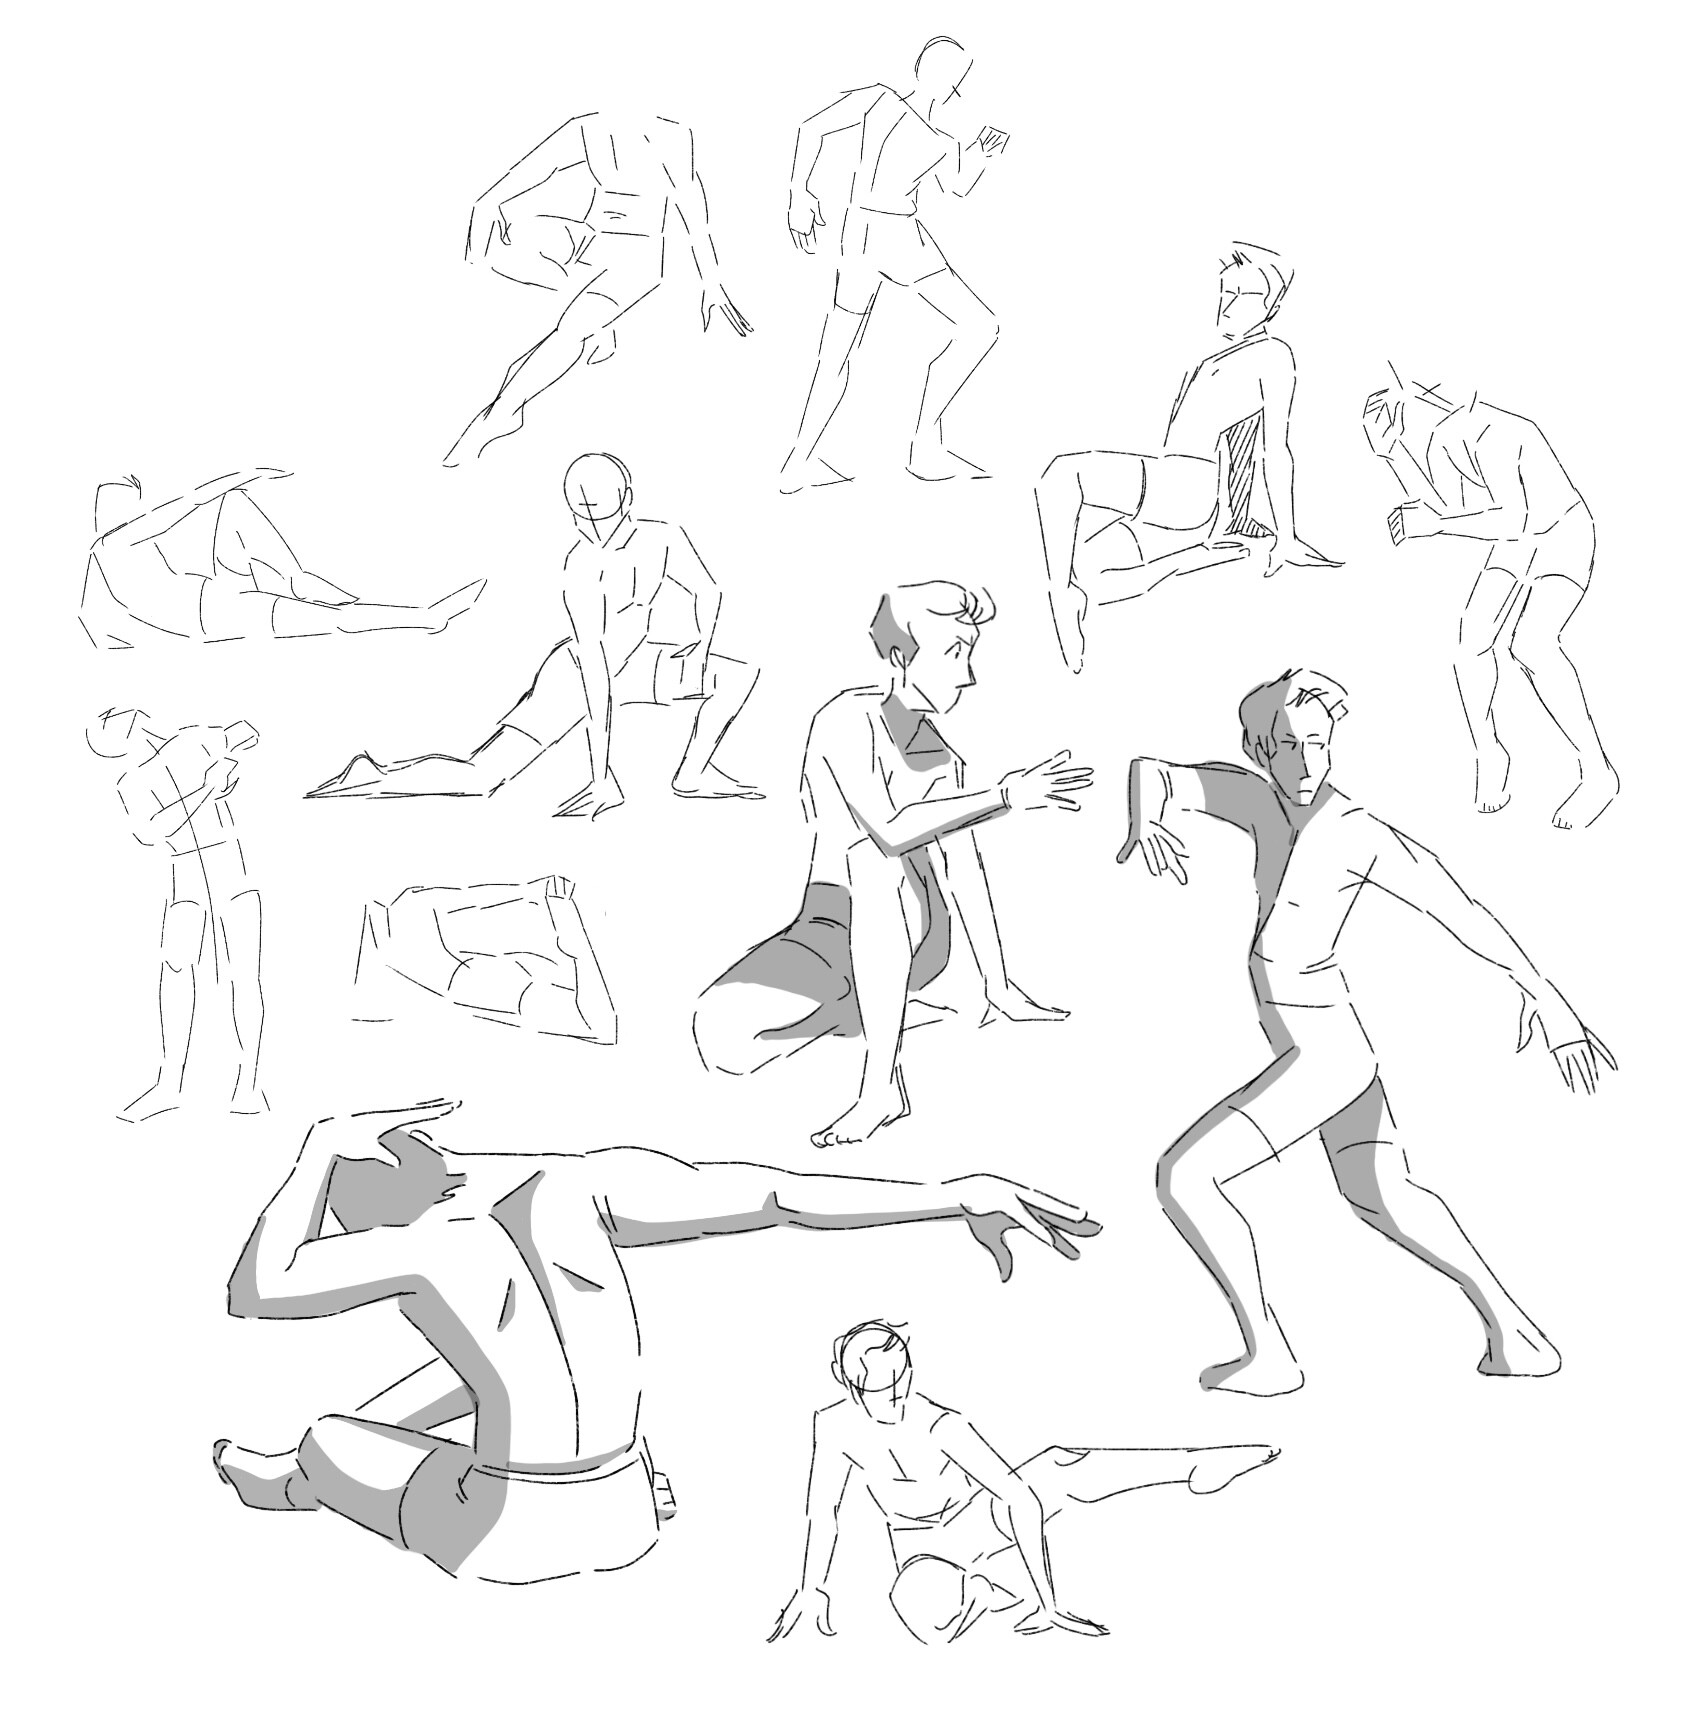 Gesture Drawing - The Ultimate Guide For Beginners